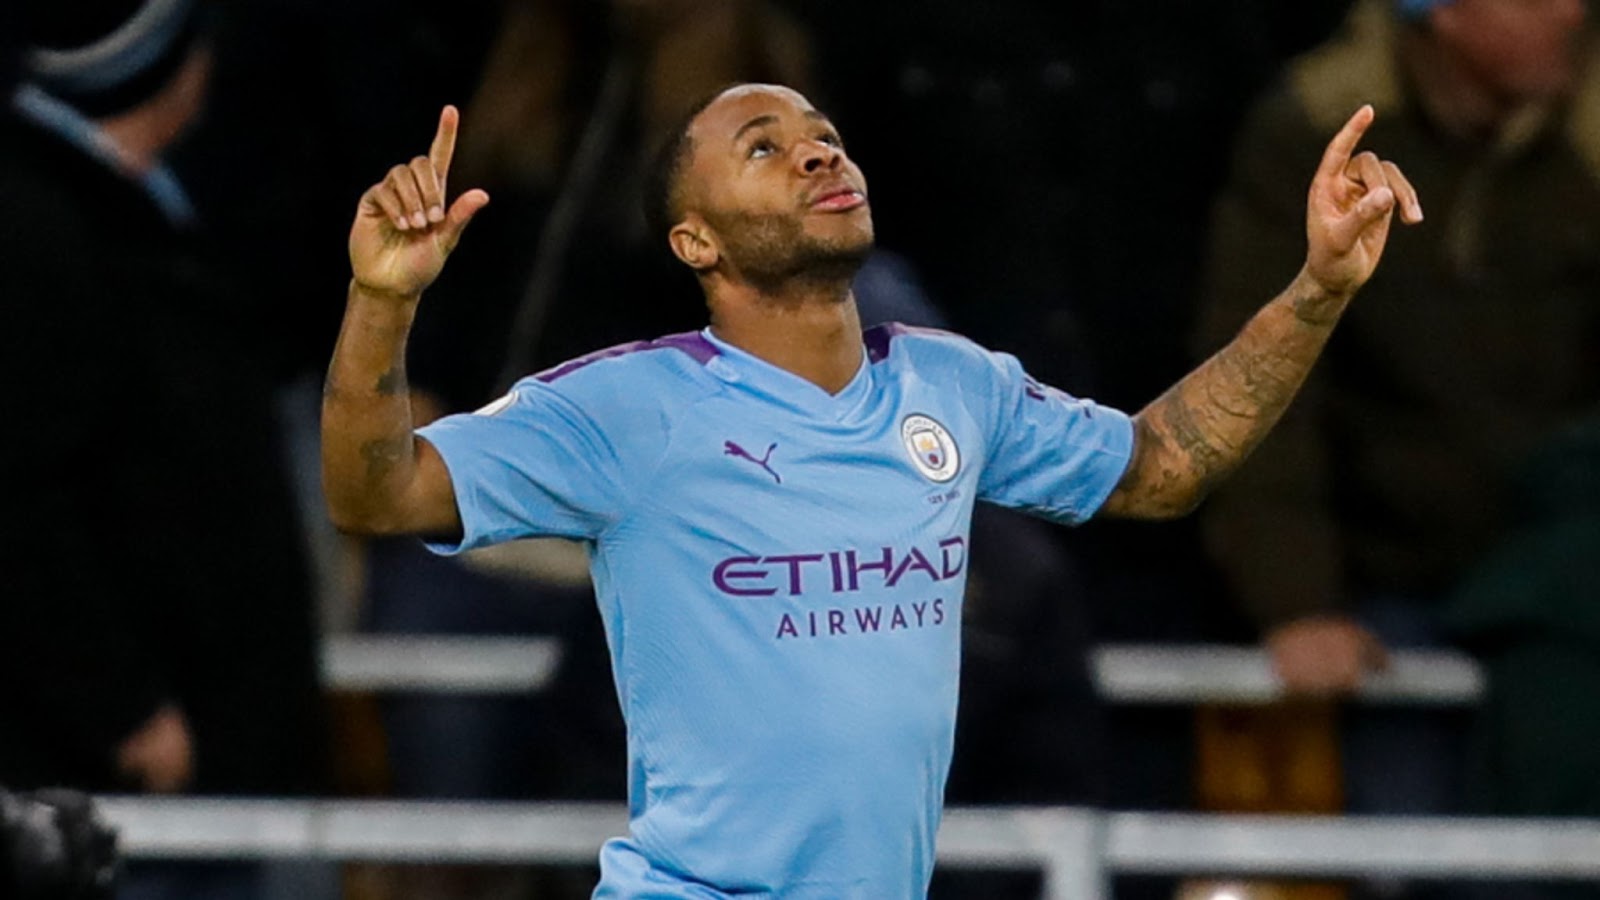 DO YOU AGREE? “Only Messi And Ronaldo Are Ahead Of Sterling ...